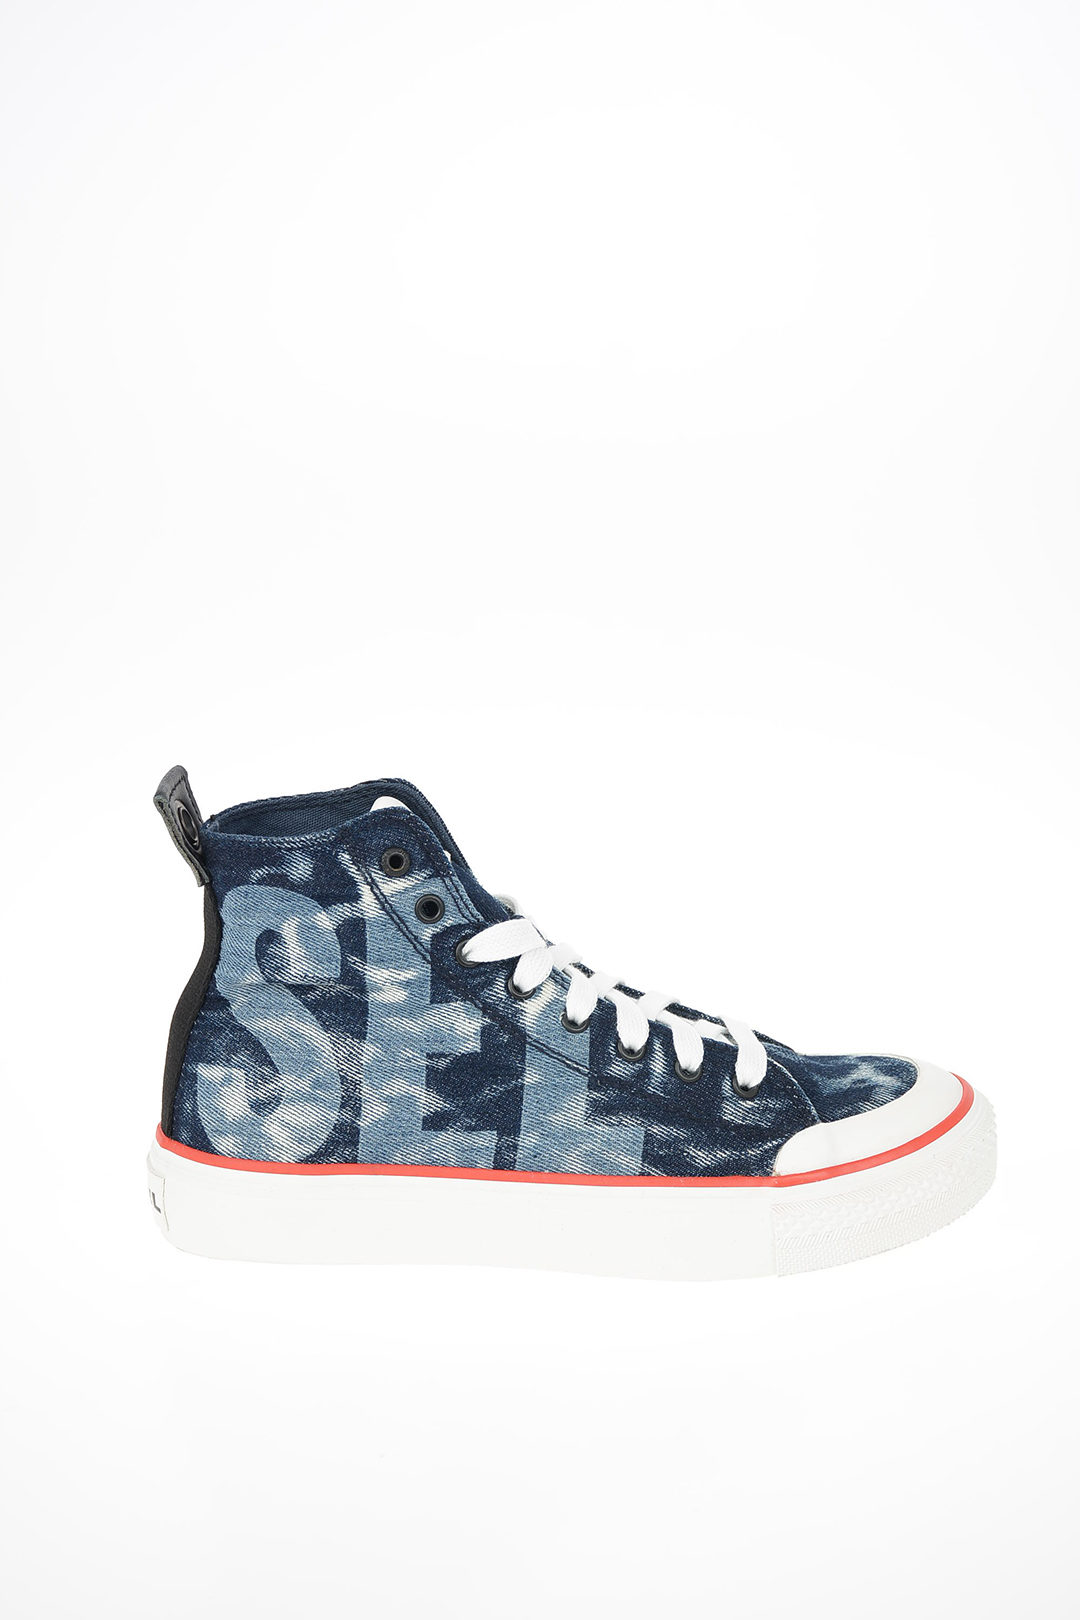 Diesel Sneakers ASTICO in Denim donna - Glamood Outlet